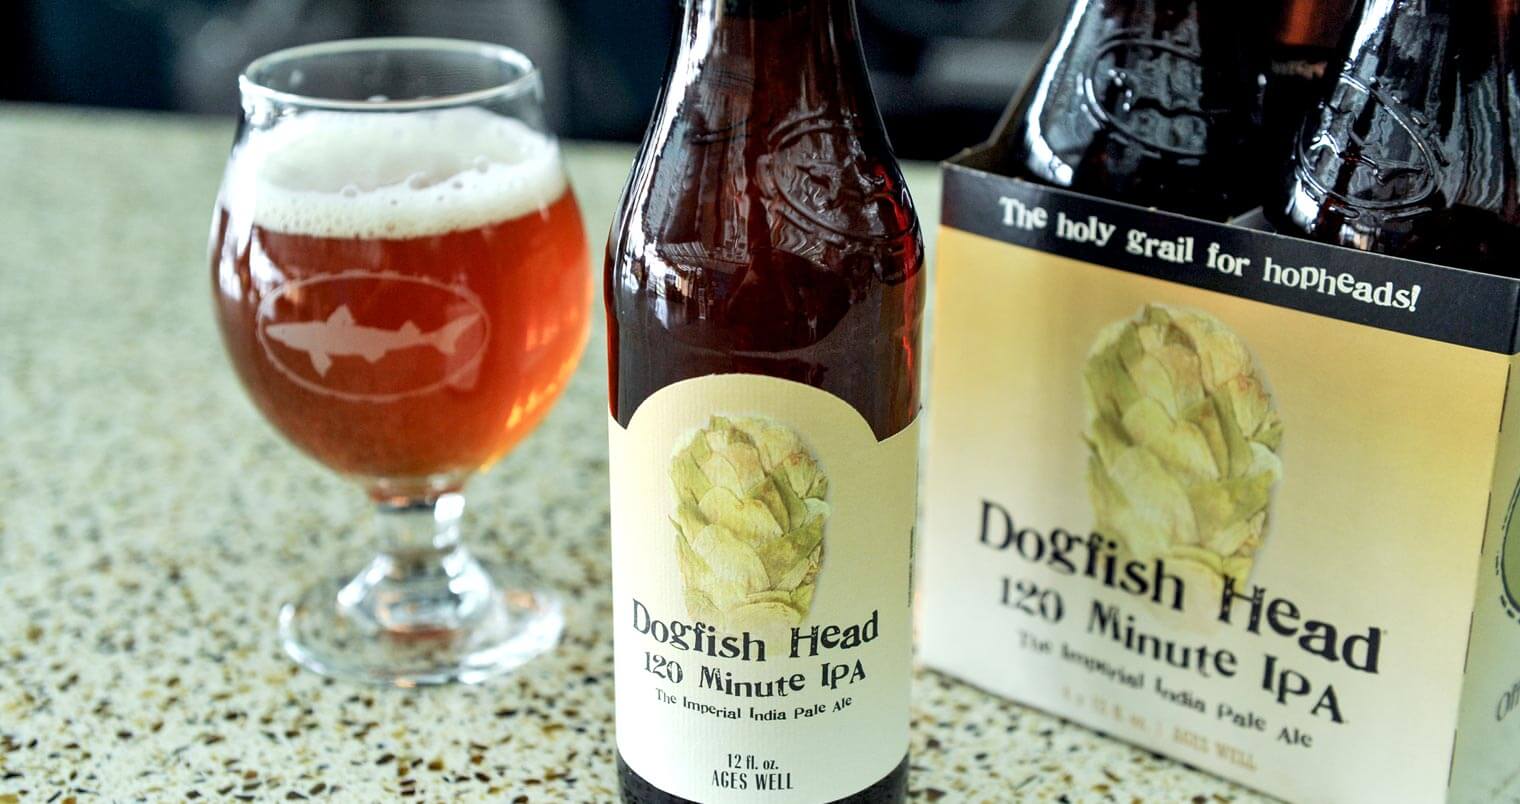 Dogfish Head Releases Abundantly Hoppy 120 Minute Imperial IPA, featured image